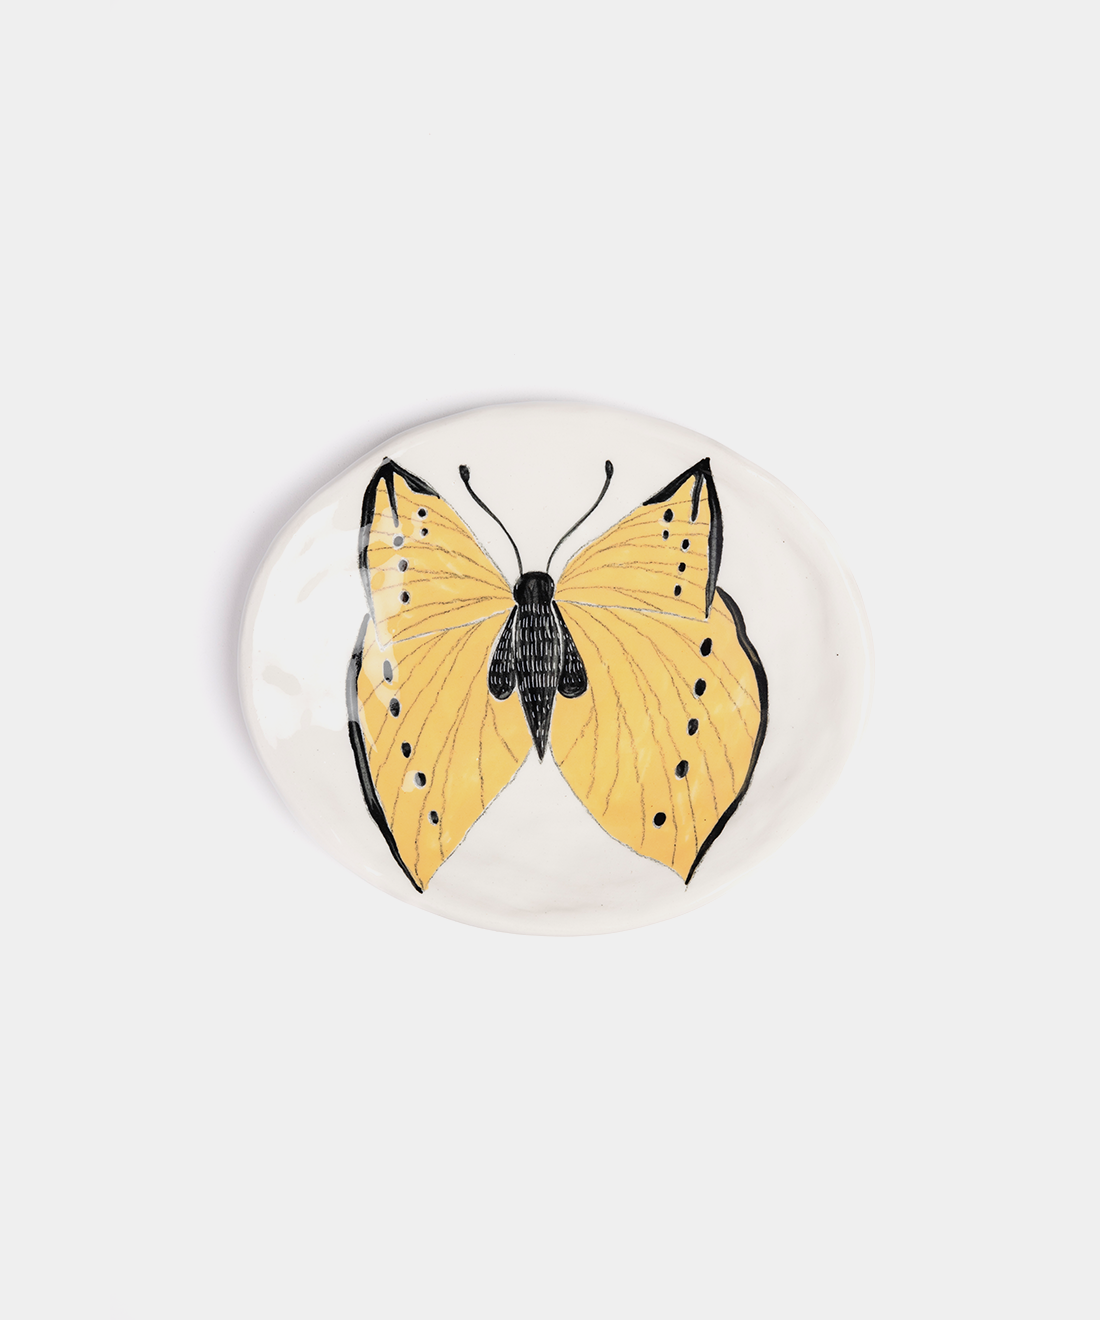 Small Butterfly Ceramic Plates, 5